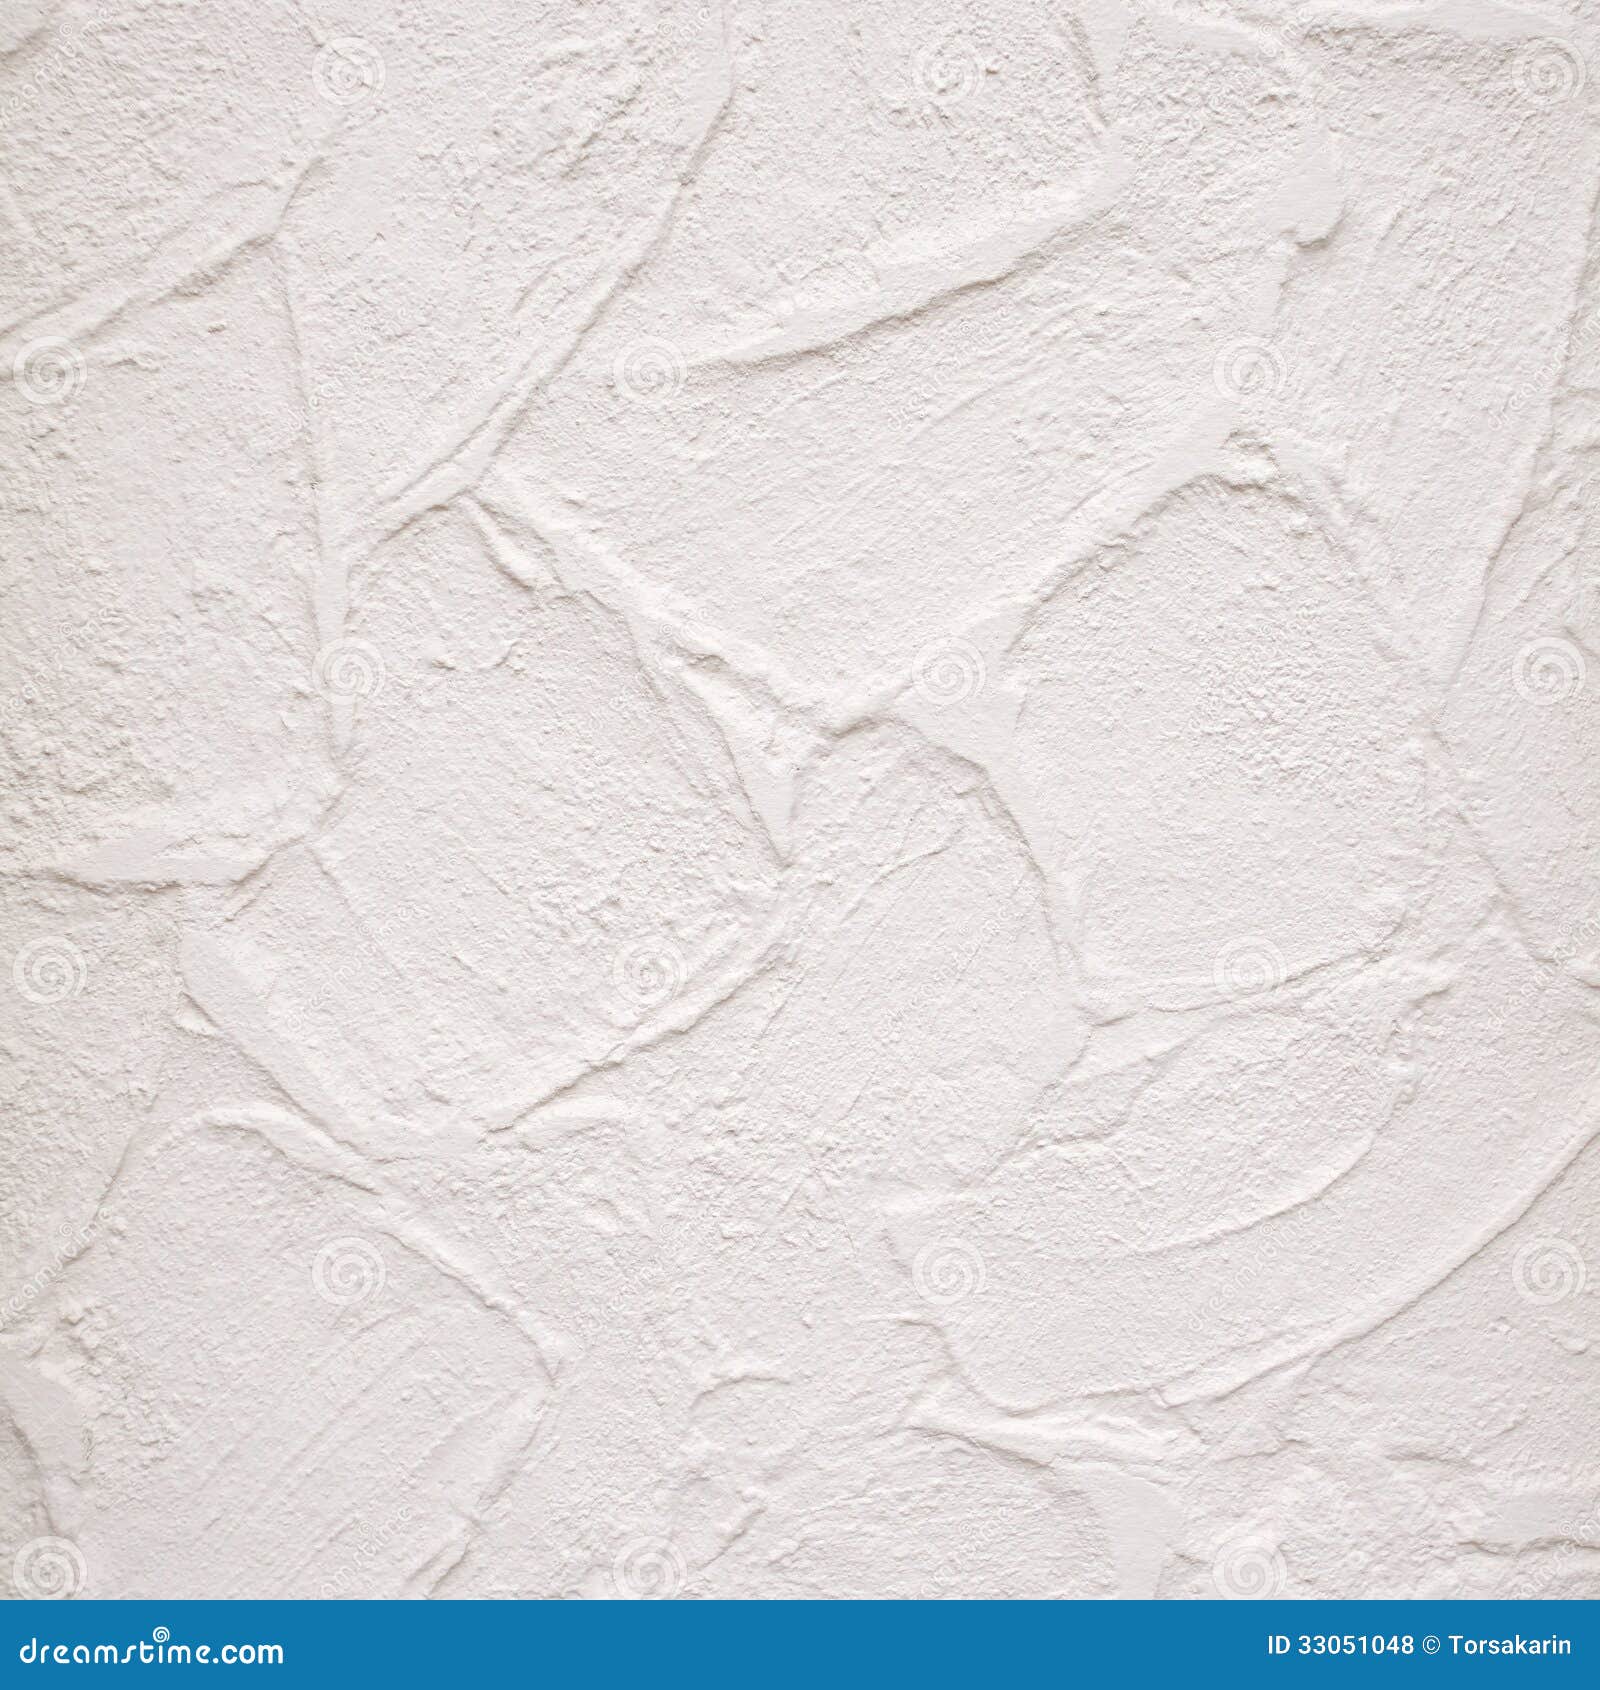 Simple Concrete Wall Background with Texture Stock Photo - Image of color,  paper: 33051048